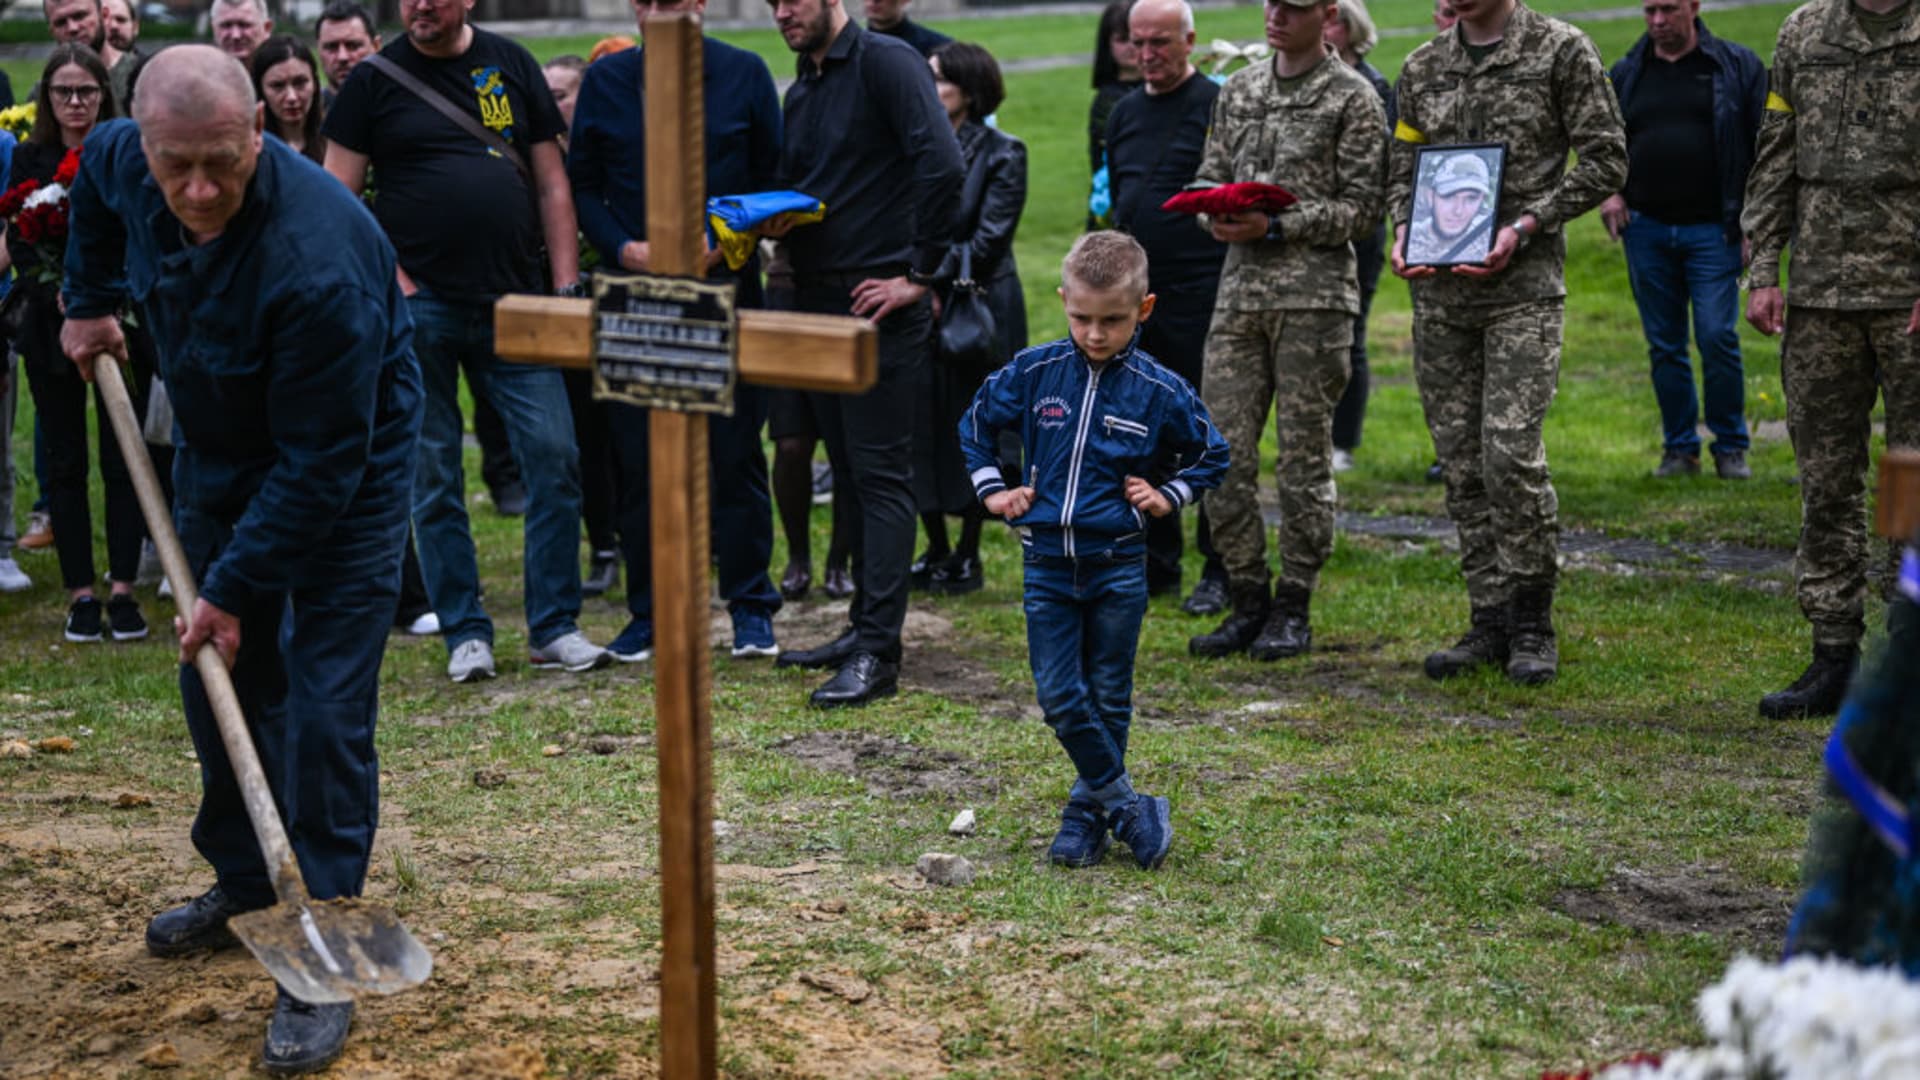 A child watches grave diggers putting soil on the grave of the the fallen sniper, Maxim Mayevsky, age 34 mourn during his funeral at the Field of Mars of Lychakiv cemetery in Lviv, Ukraine on May 13, 2022.